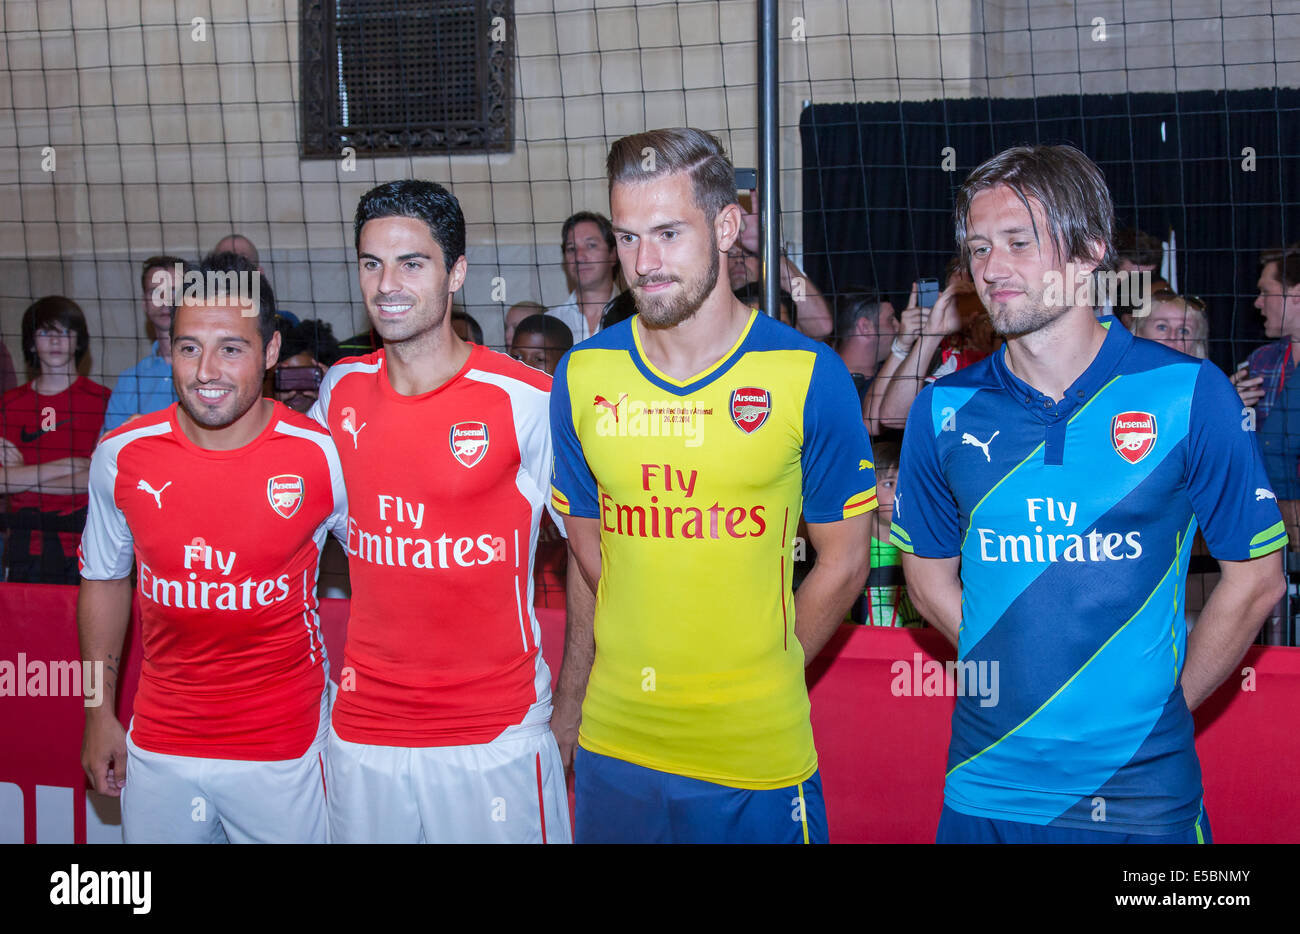 New York, NY, USA - July 25, 2014: (L-R) Footballers Santi Cazorla, Mikel  Arteta, and Tomas Rosicky greet fans at the PUMA partners with Arsenal  Football Club to Debut Monumental Cannon event